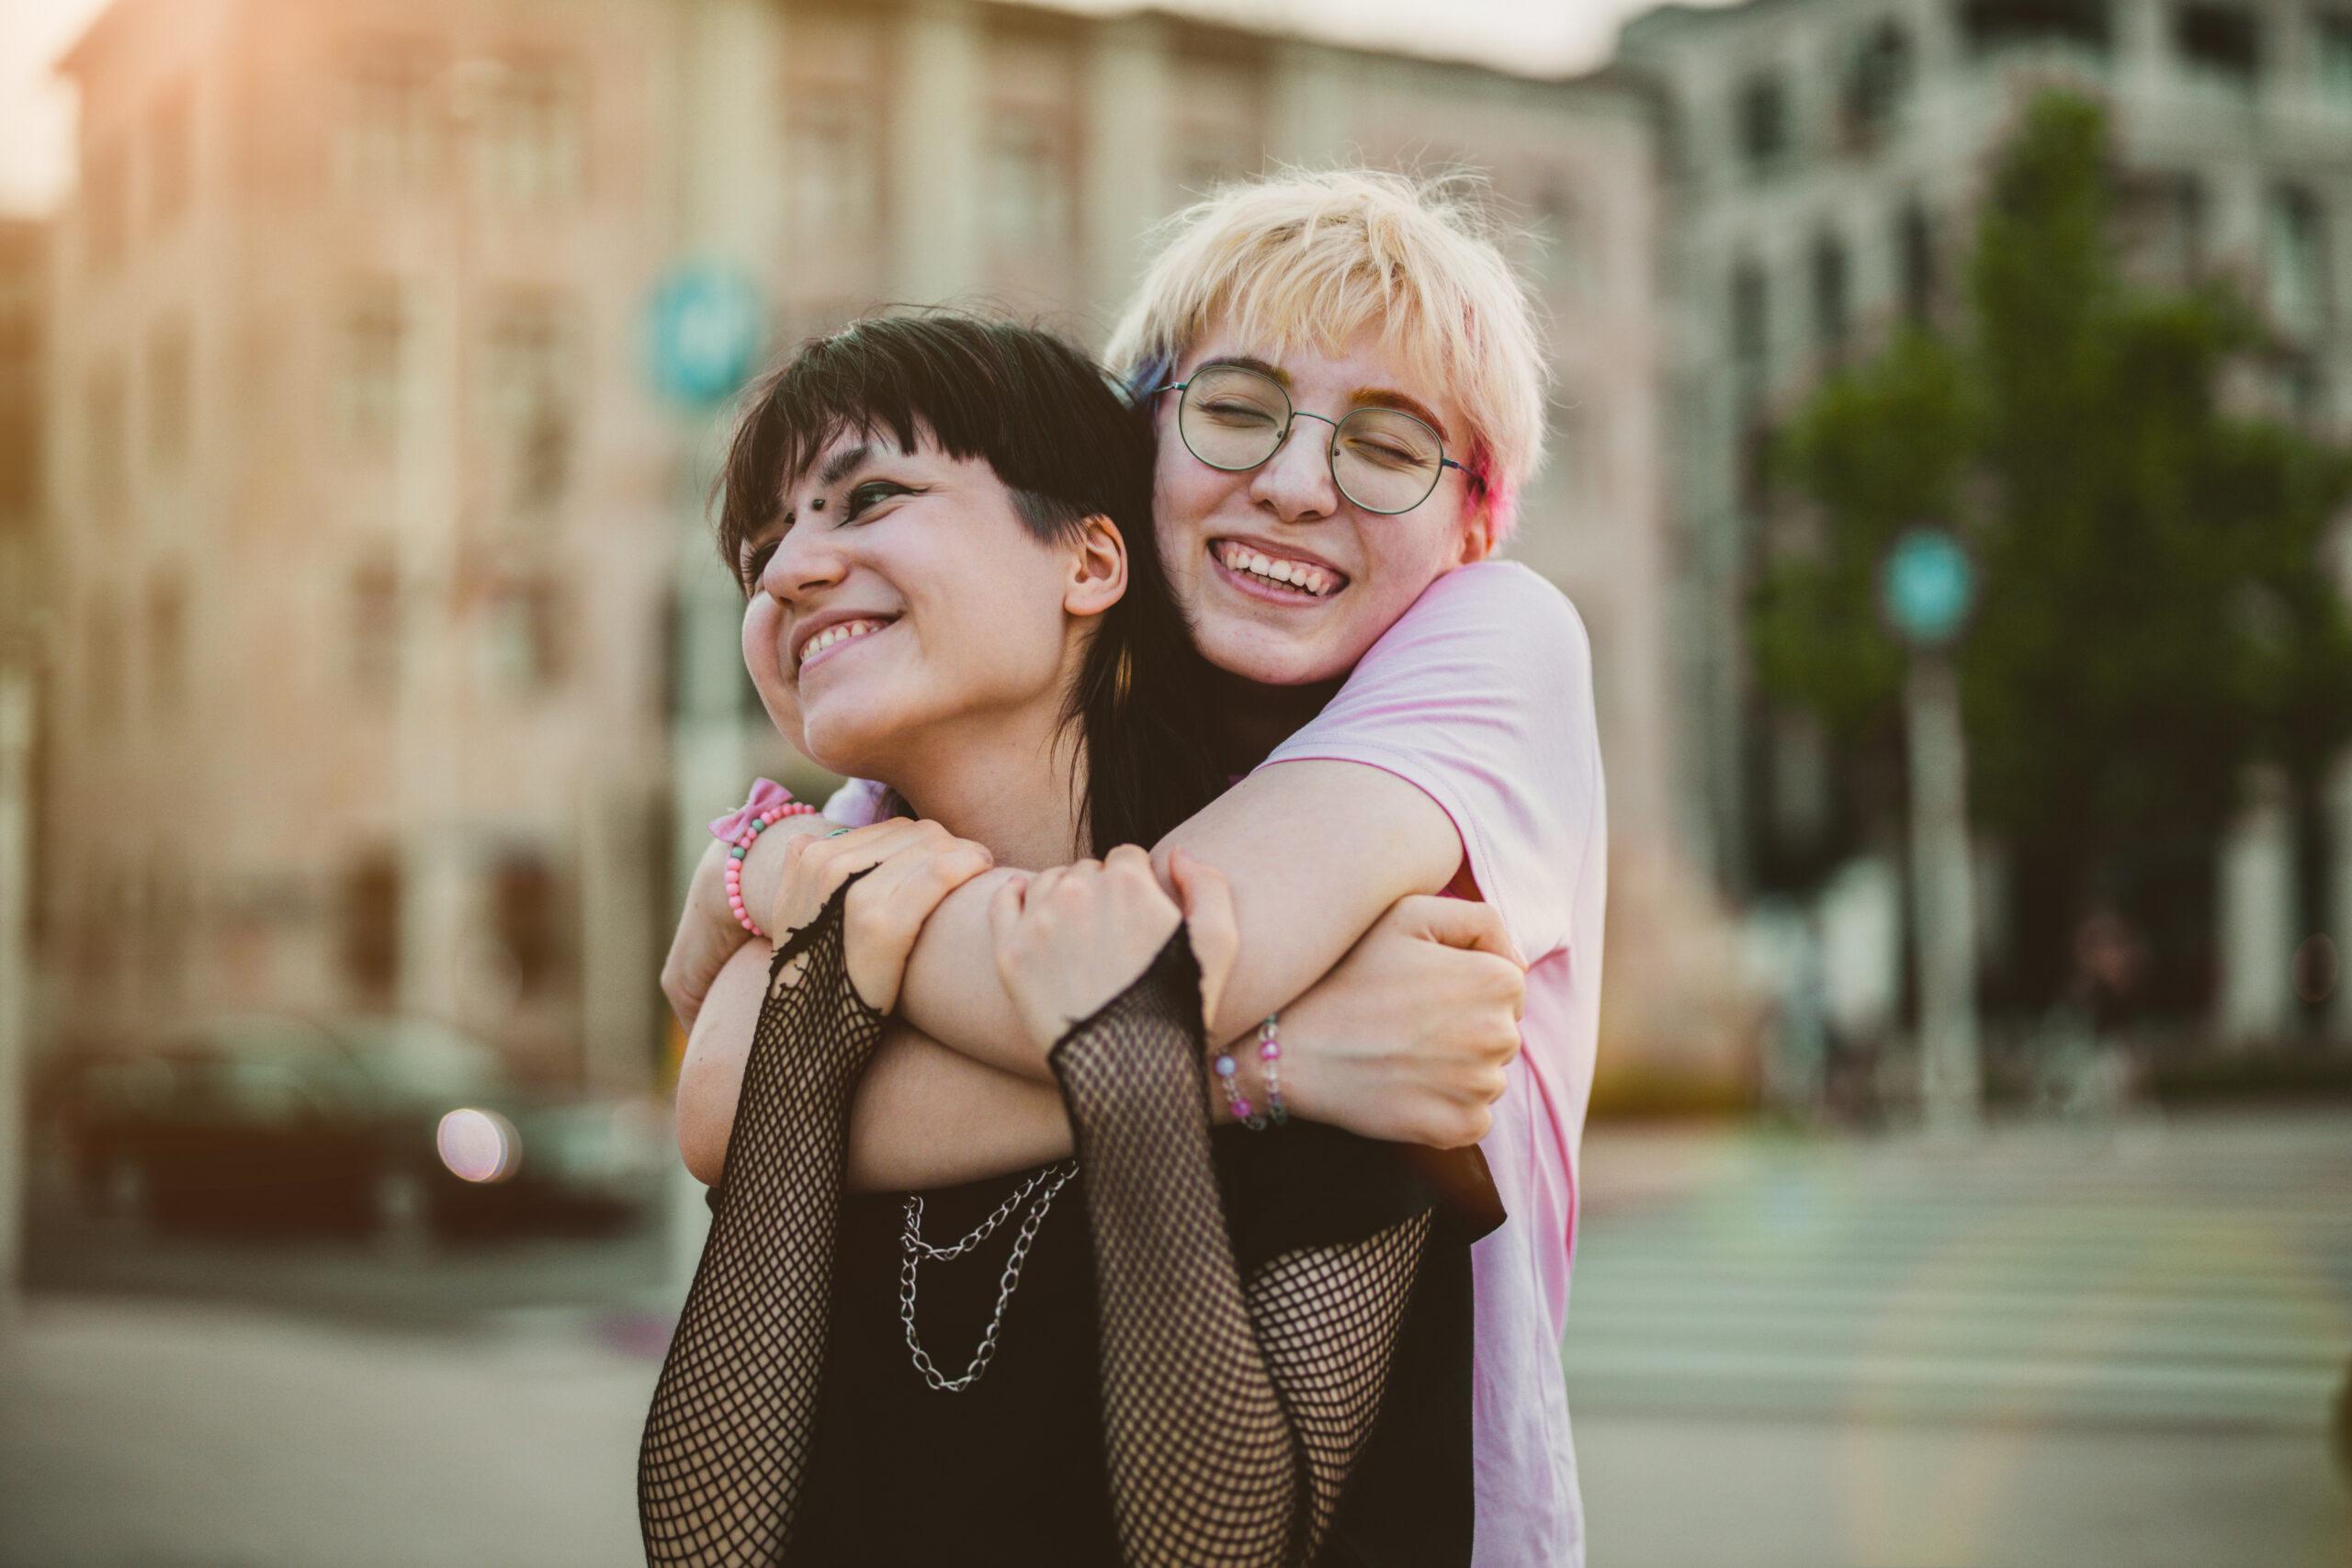 two women hugging each other on a city street.